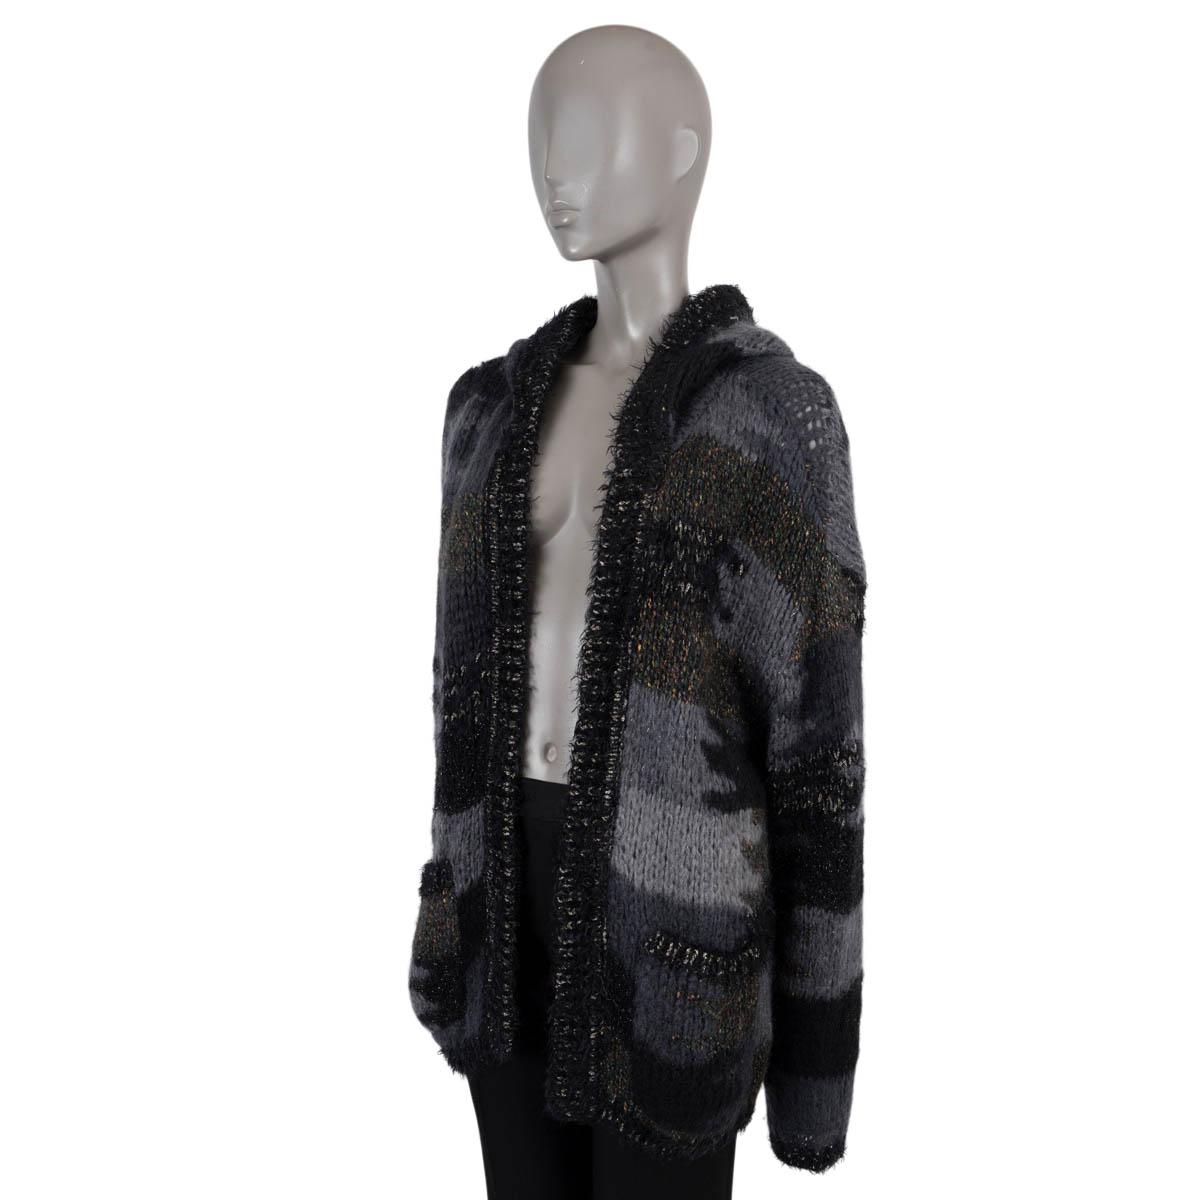 100% authentic Saint Laurent Baja knit jacket in various shades of gray camouflage jacquard mohair (39%), polyamide (36%), wool (10%), polyester (10%), acrylic (2%), viscose (2%) and metallized polyester (1%). Features an open front, hood, lurex